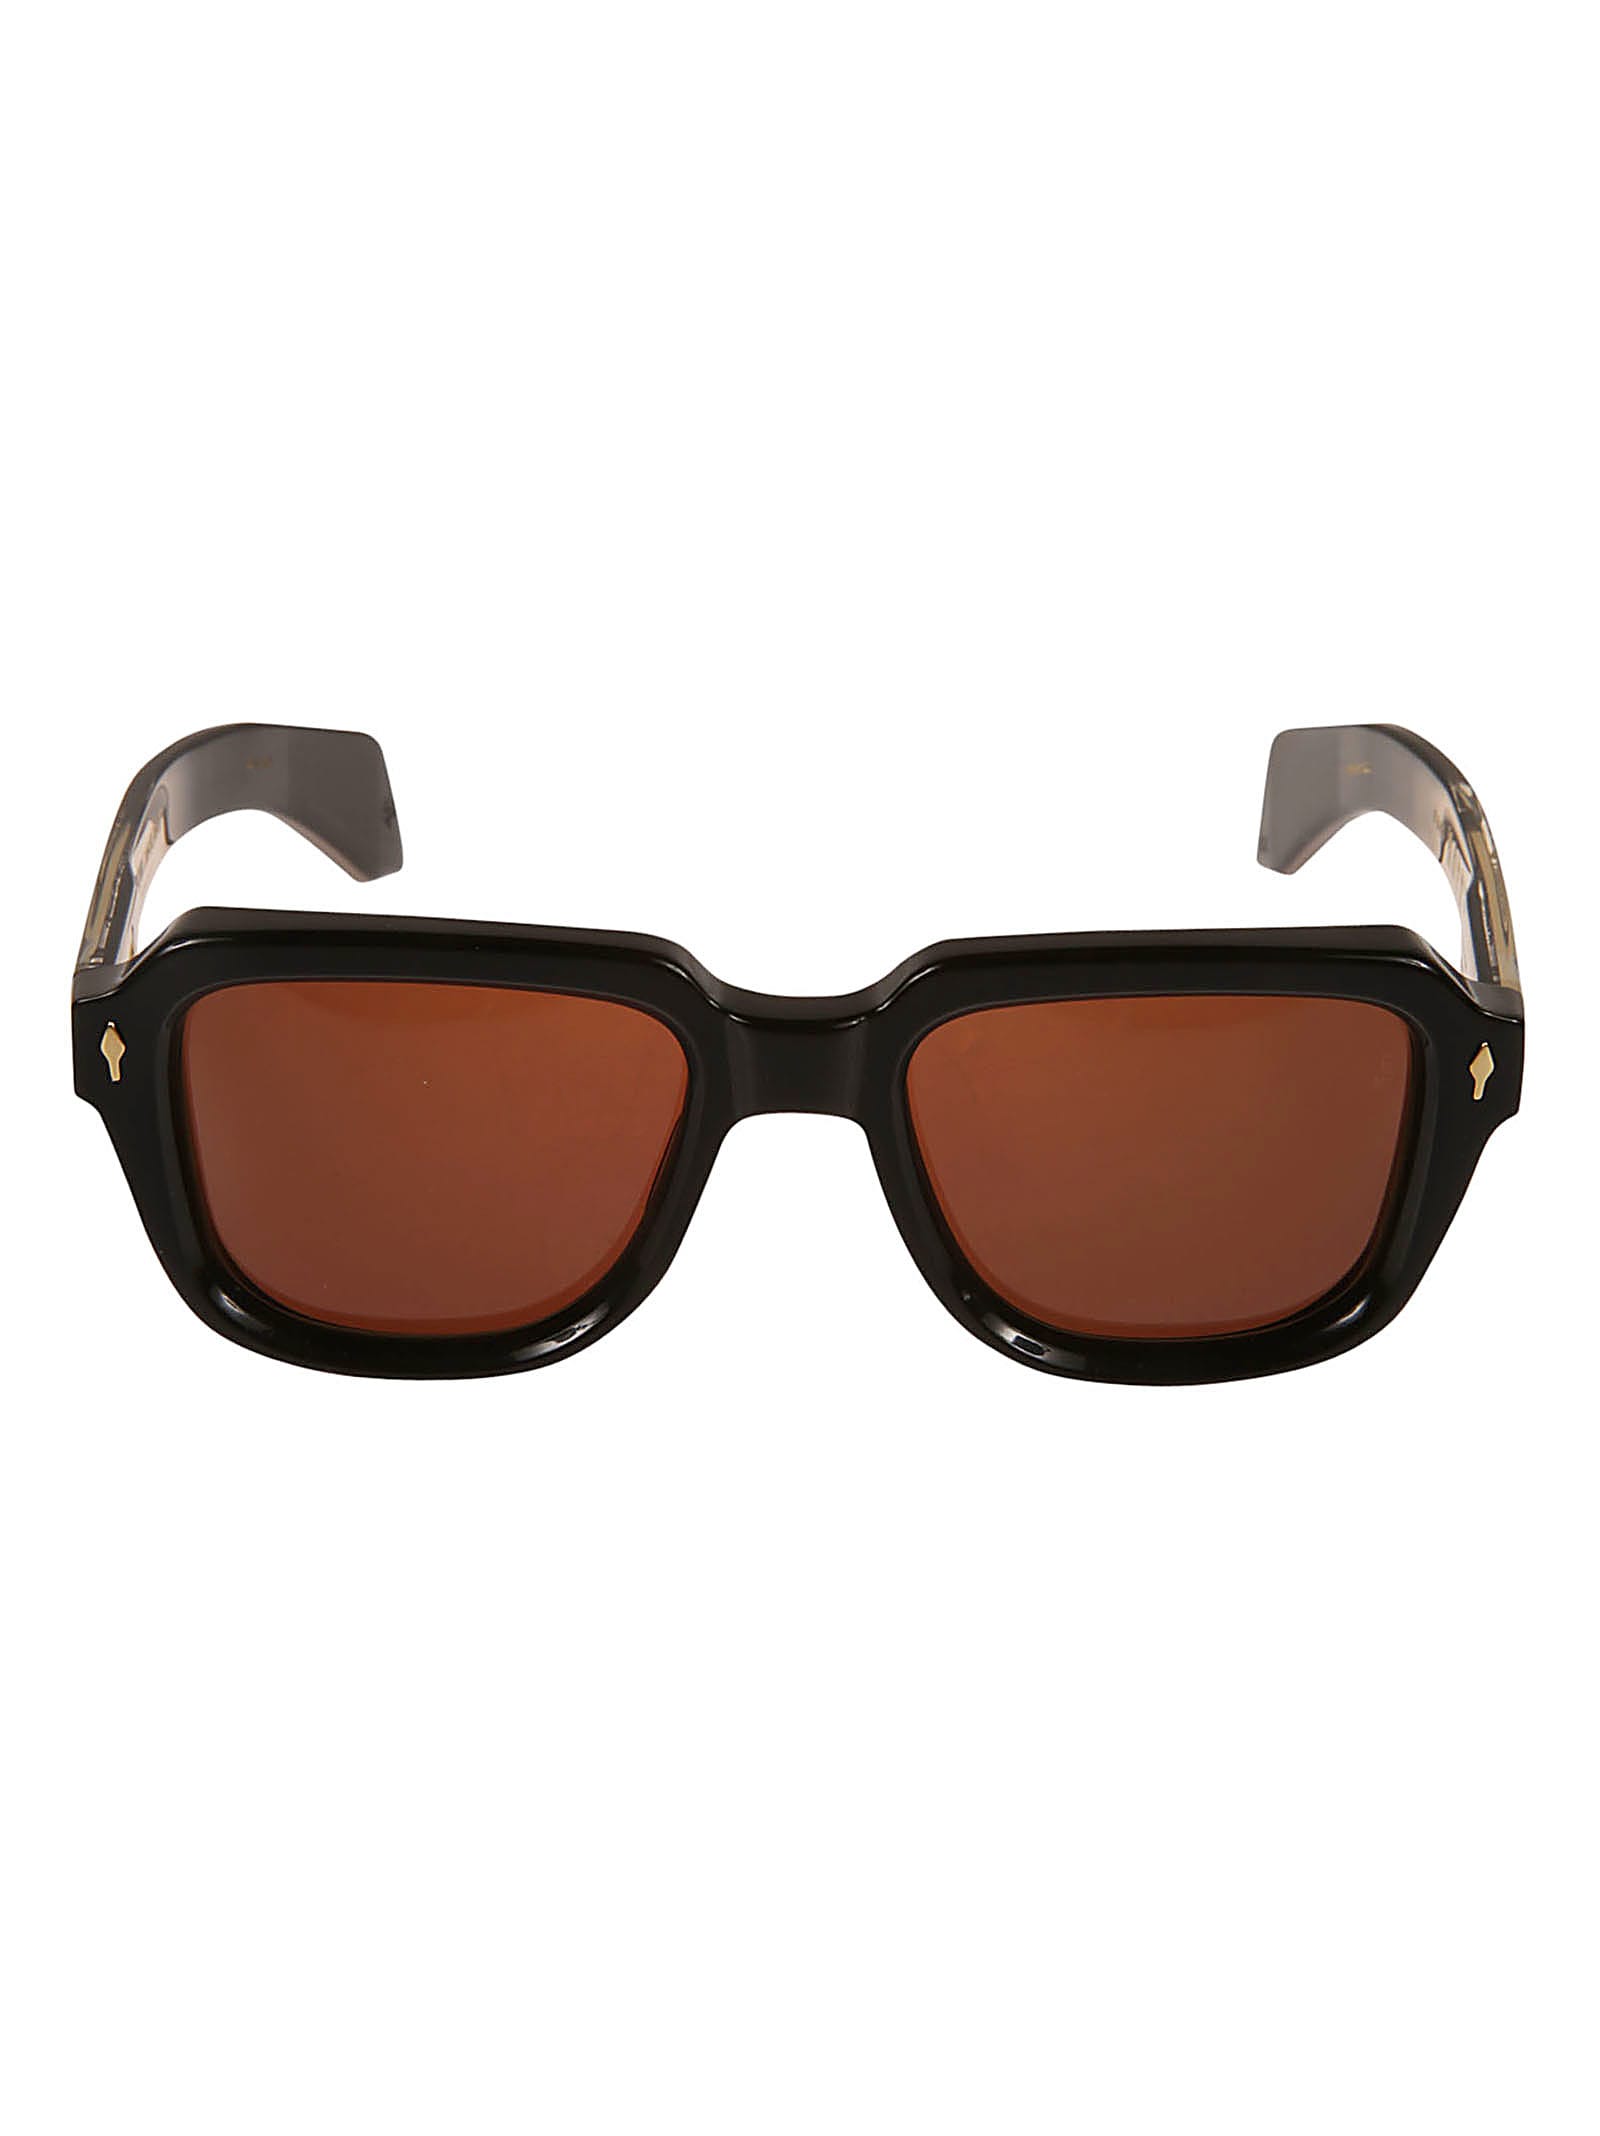 Jacques Marie Mage Taos Hopper Sunglasses In Black | ModeSens